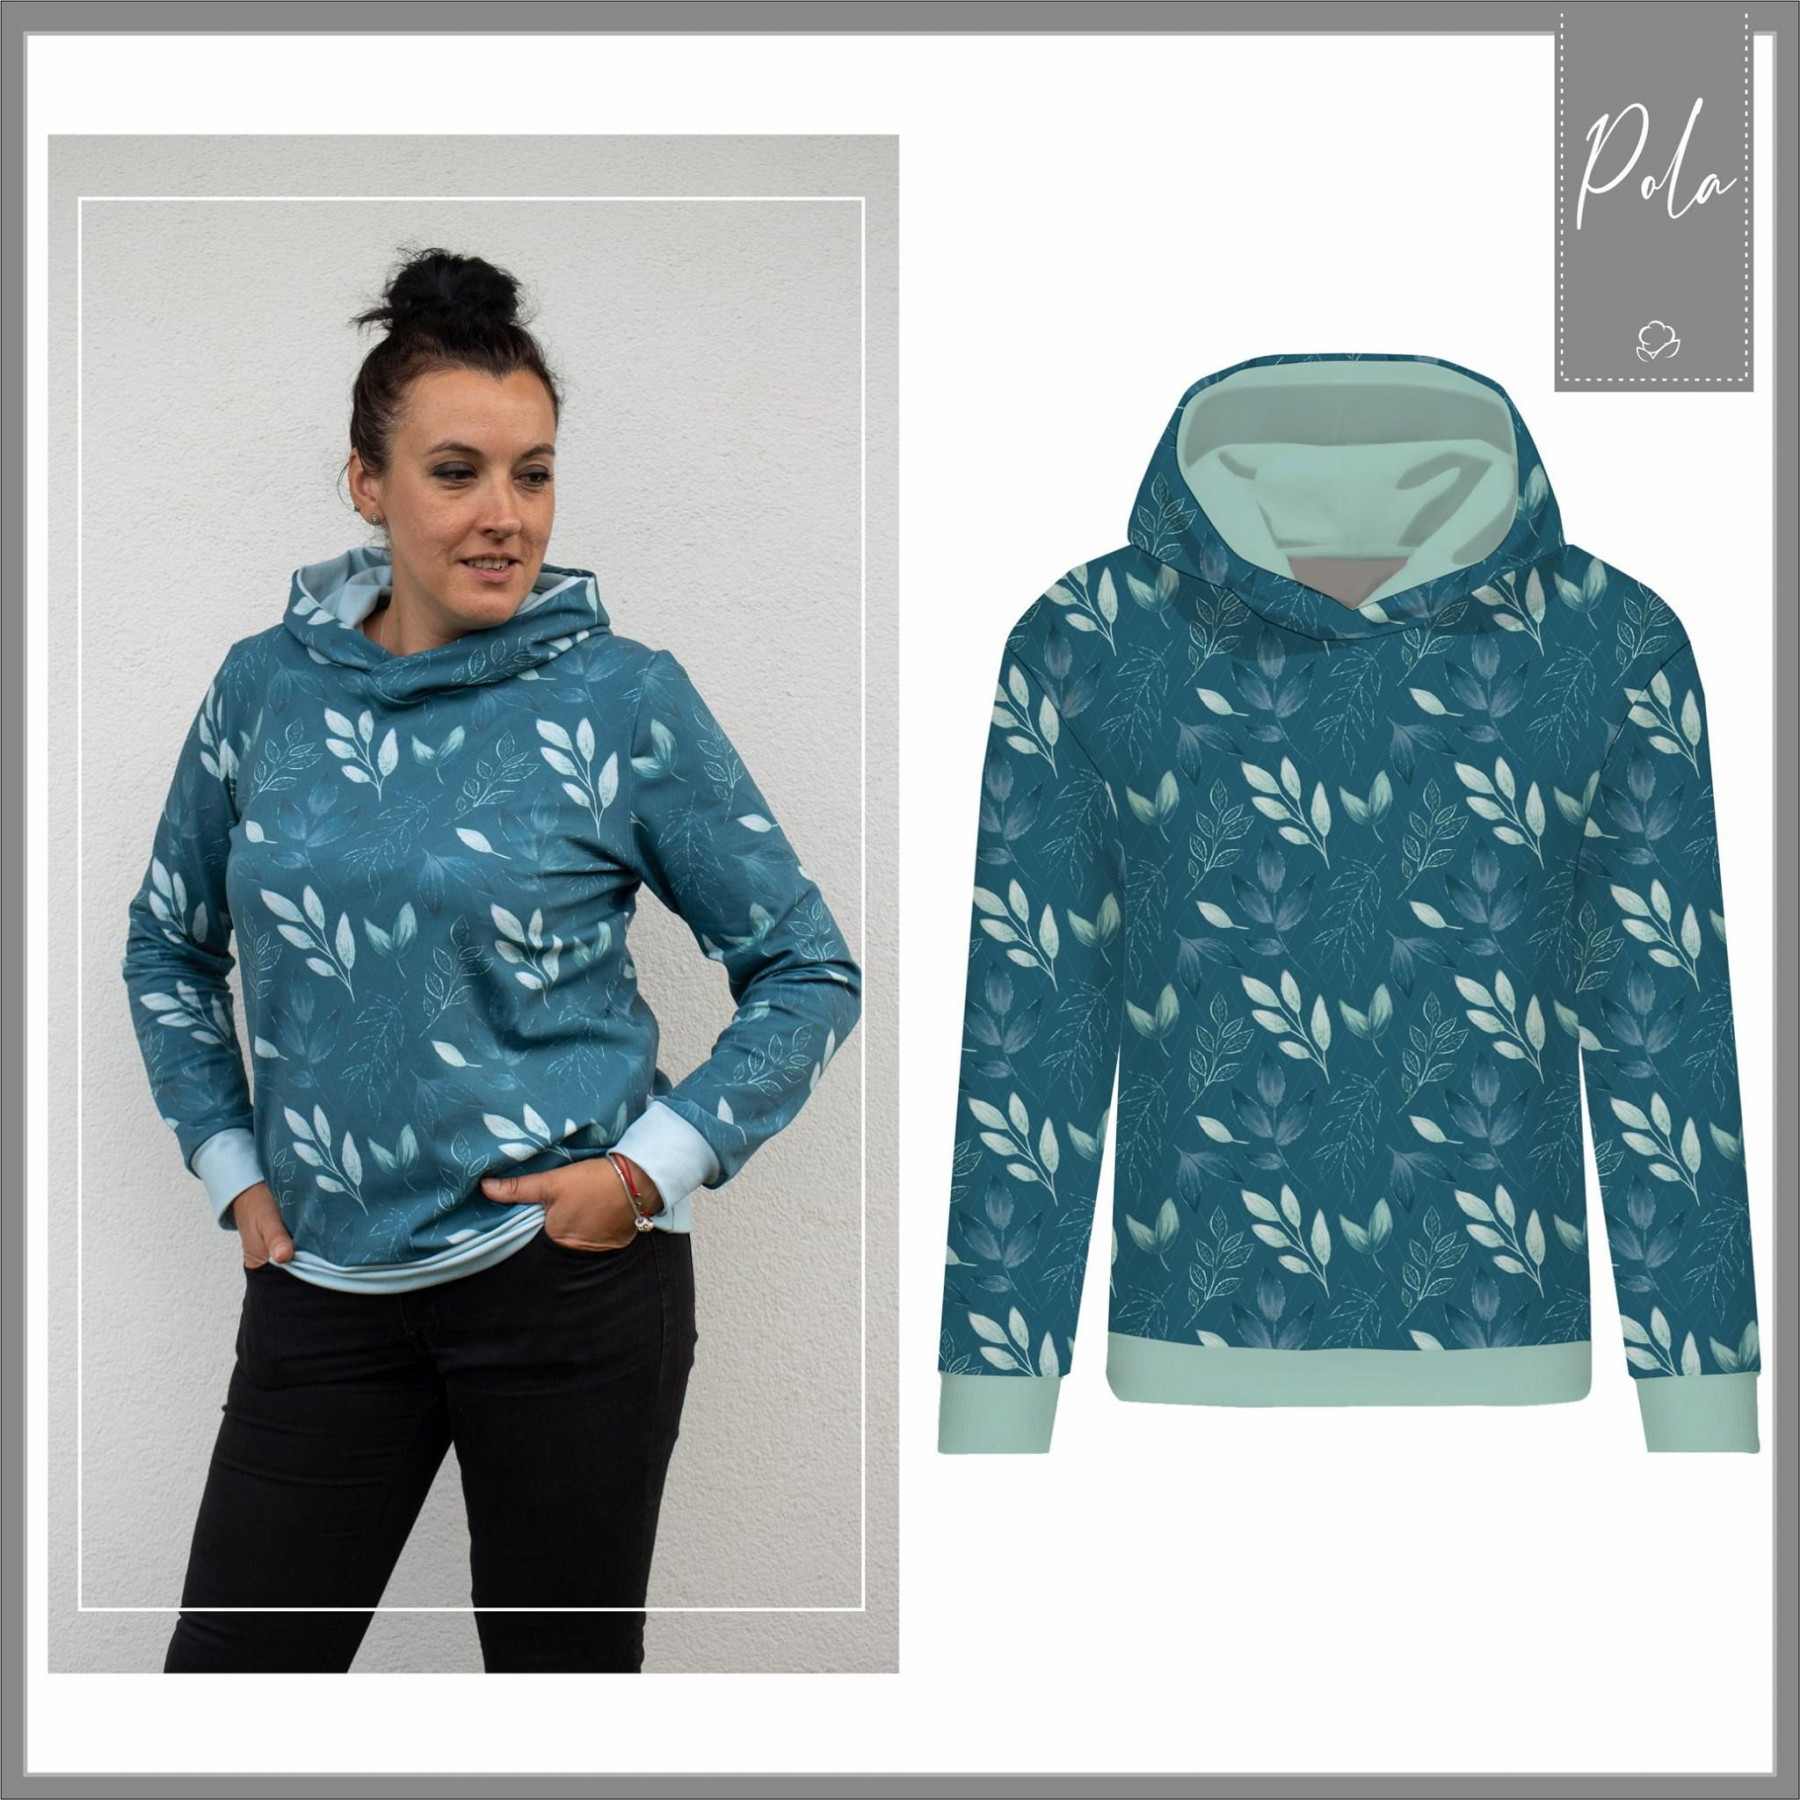 CLASSIC WOMEN’S HOODIE (POLA) - FEATHERS - looped knit fabric 